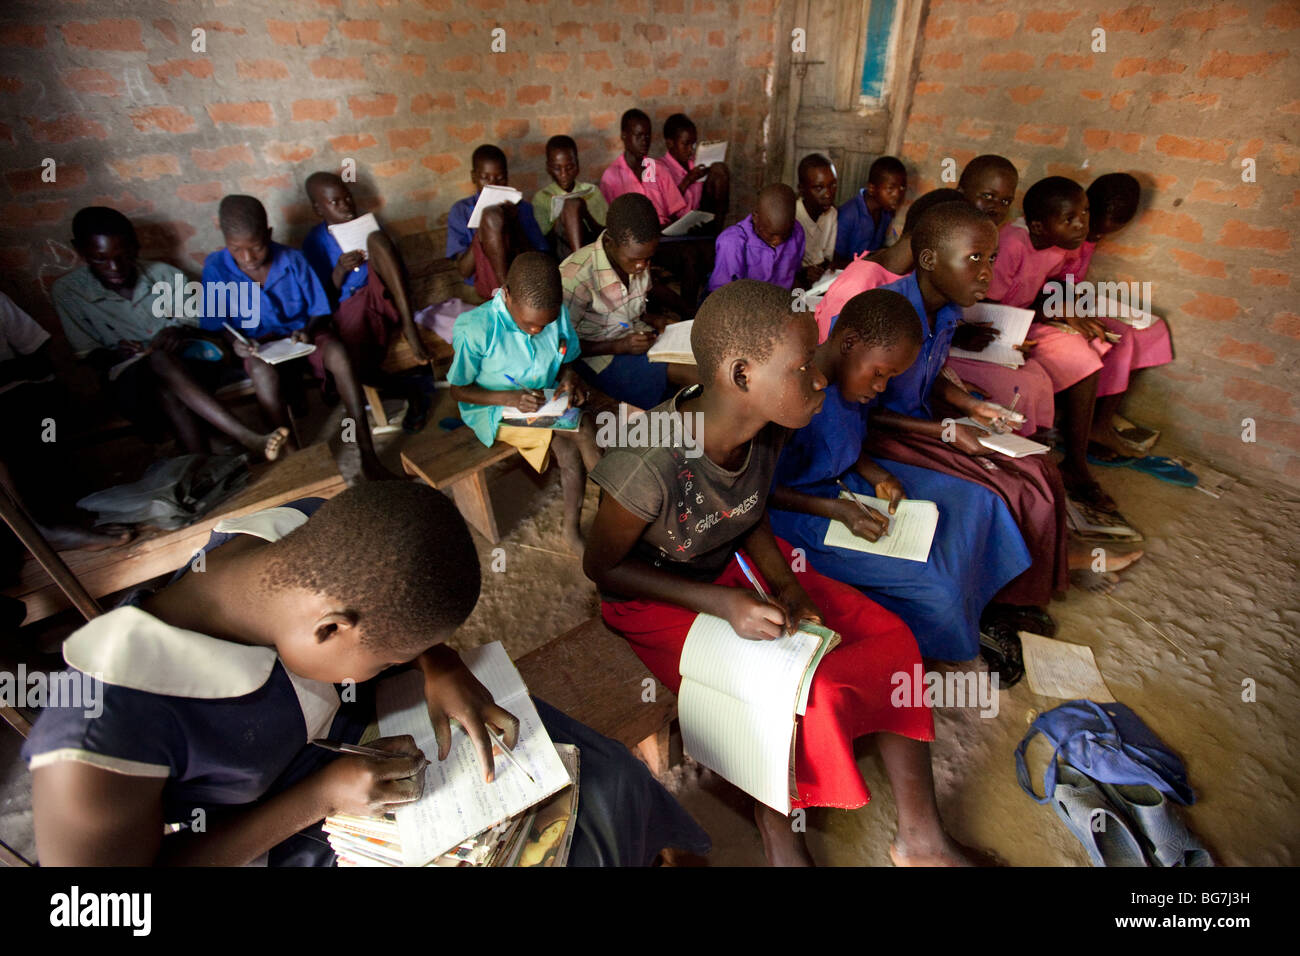 Girls and boys learn in a dark classroom without desks in Amuria, Eastern Uganda. Stock Photo